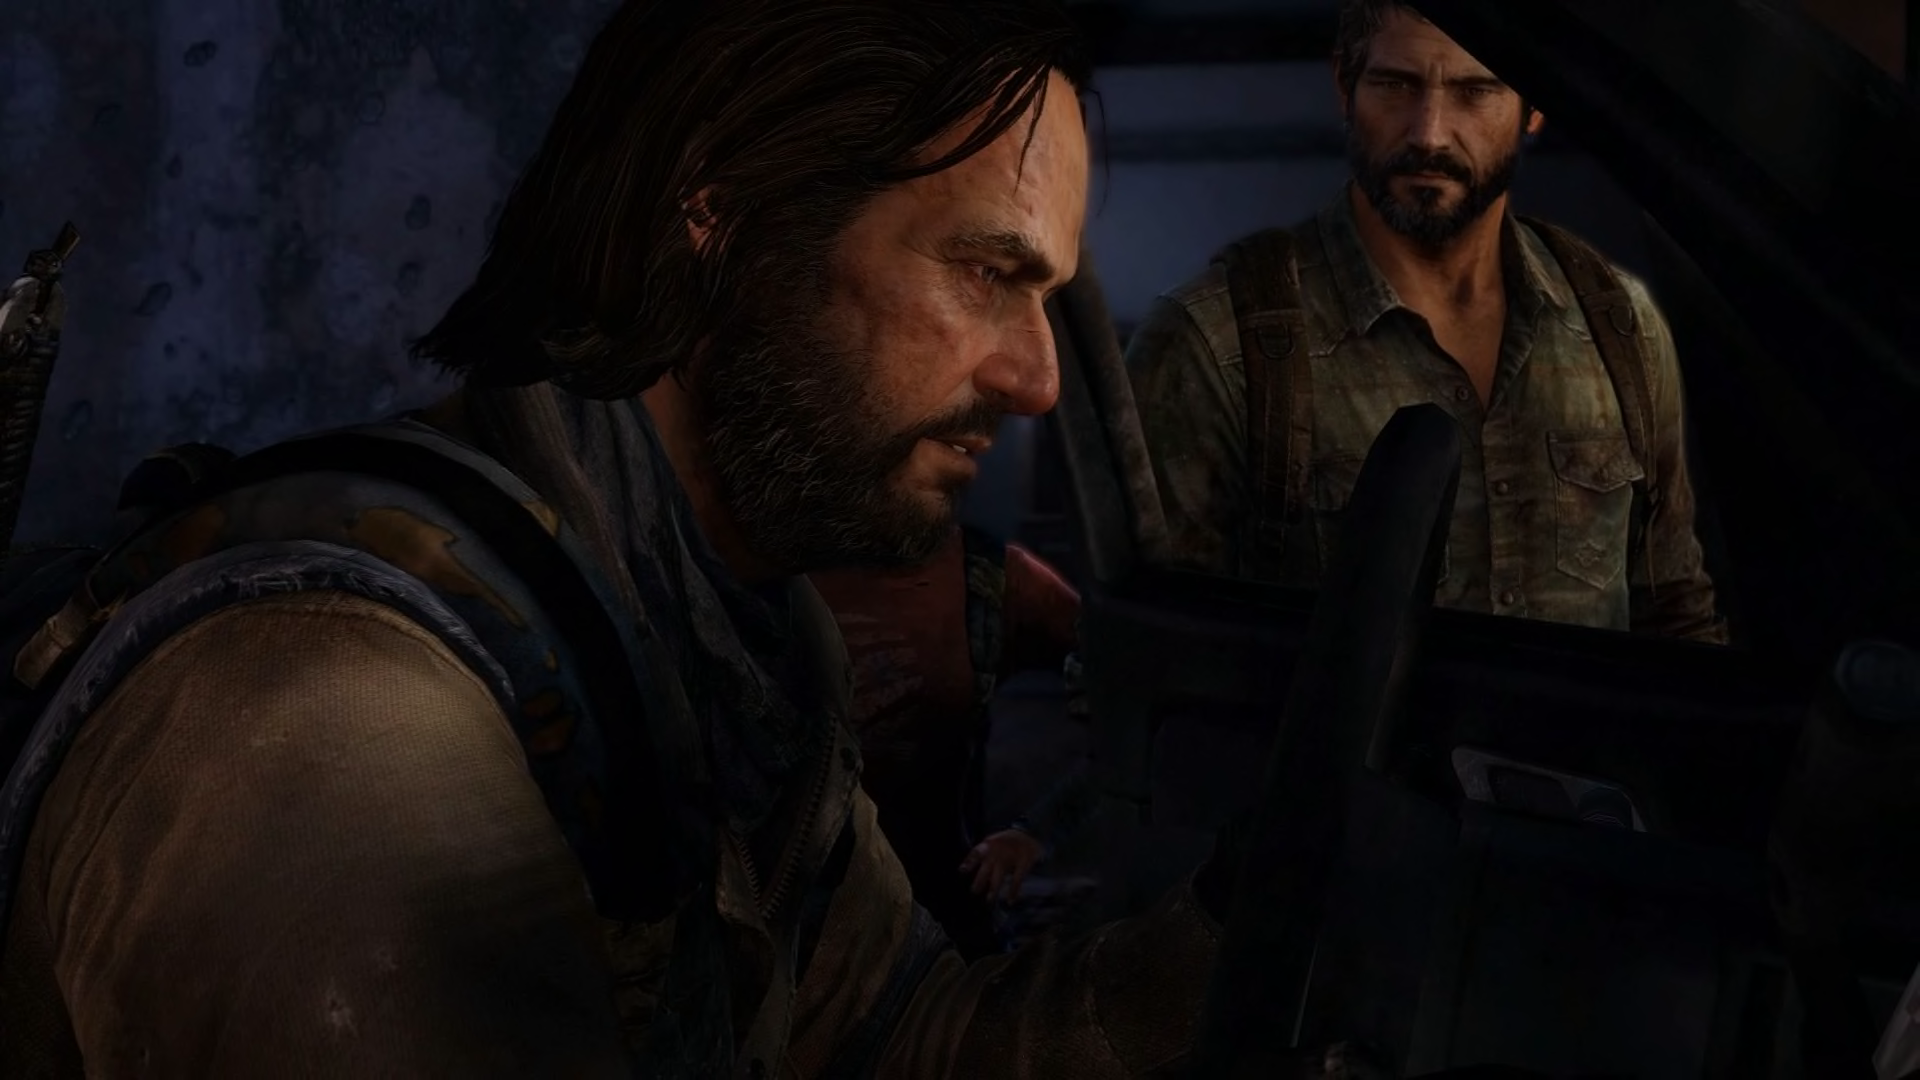 Bill and Frank in 'The Last of Us' Game Versus the TV Show